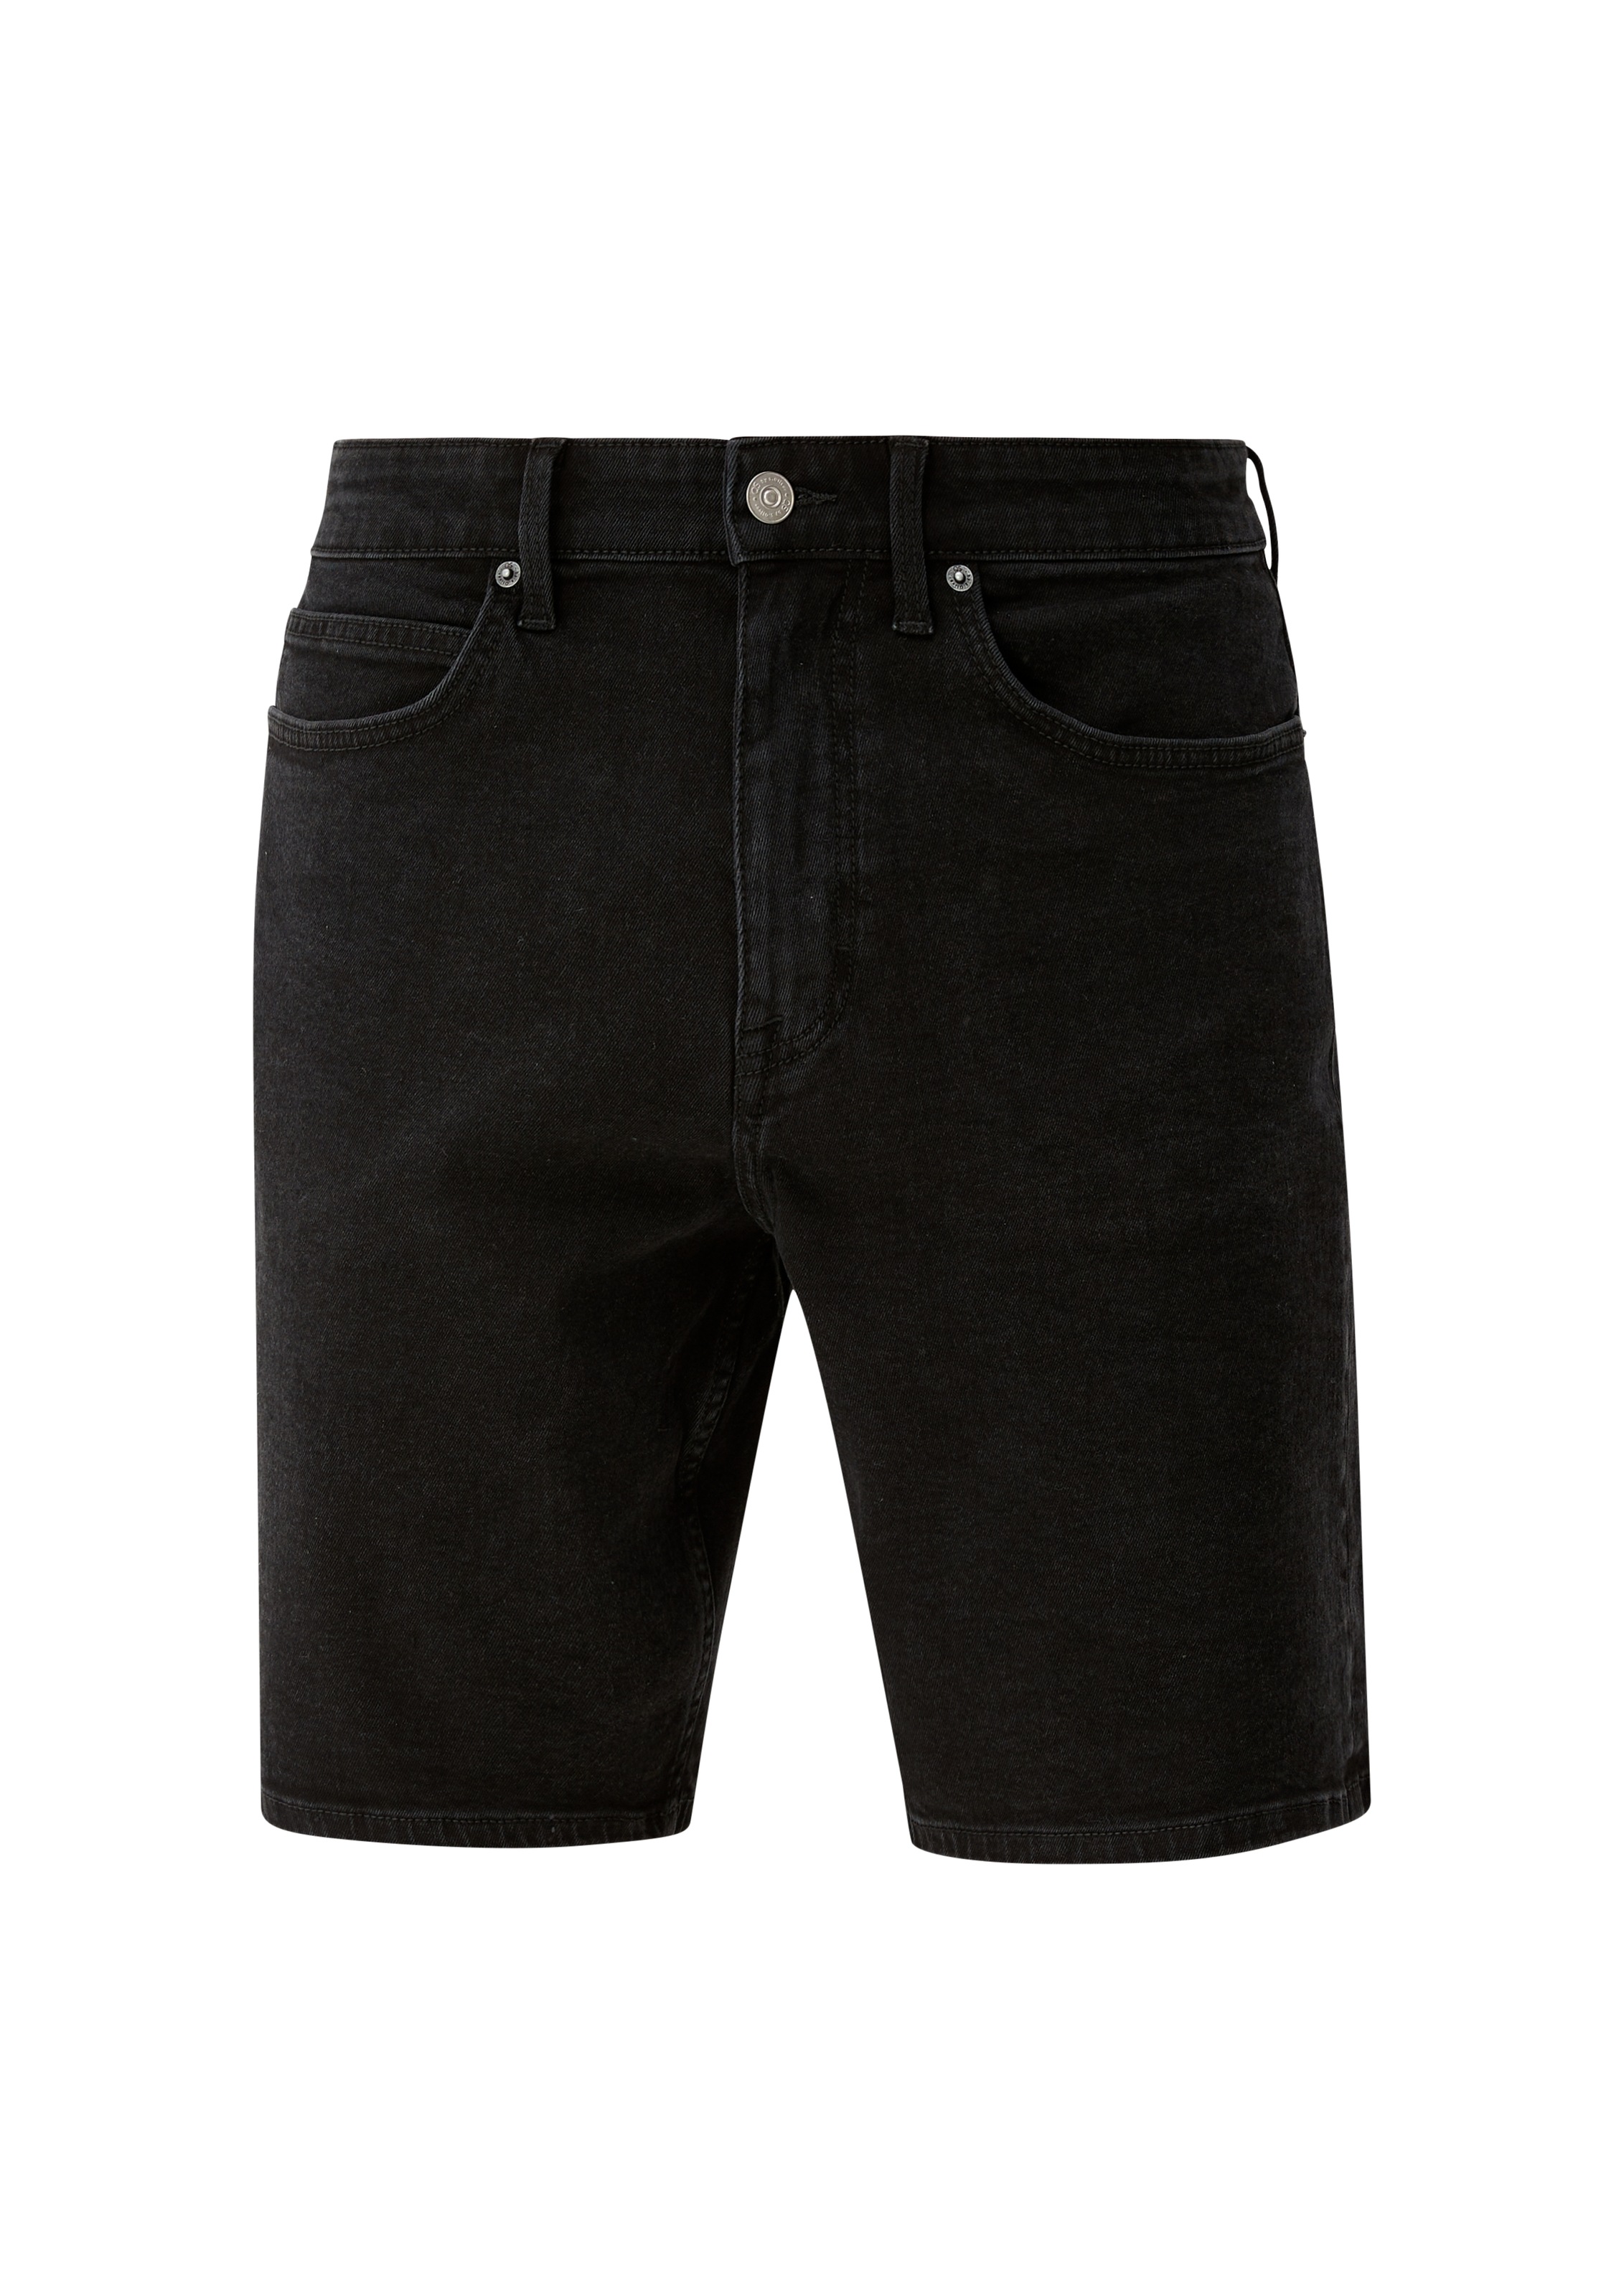 Q/S by s.Oliver Shorts bei ♕